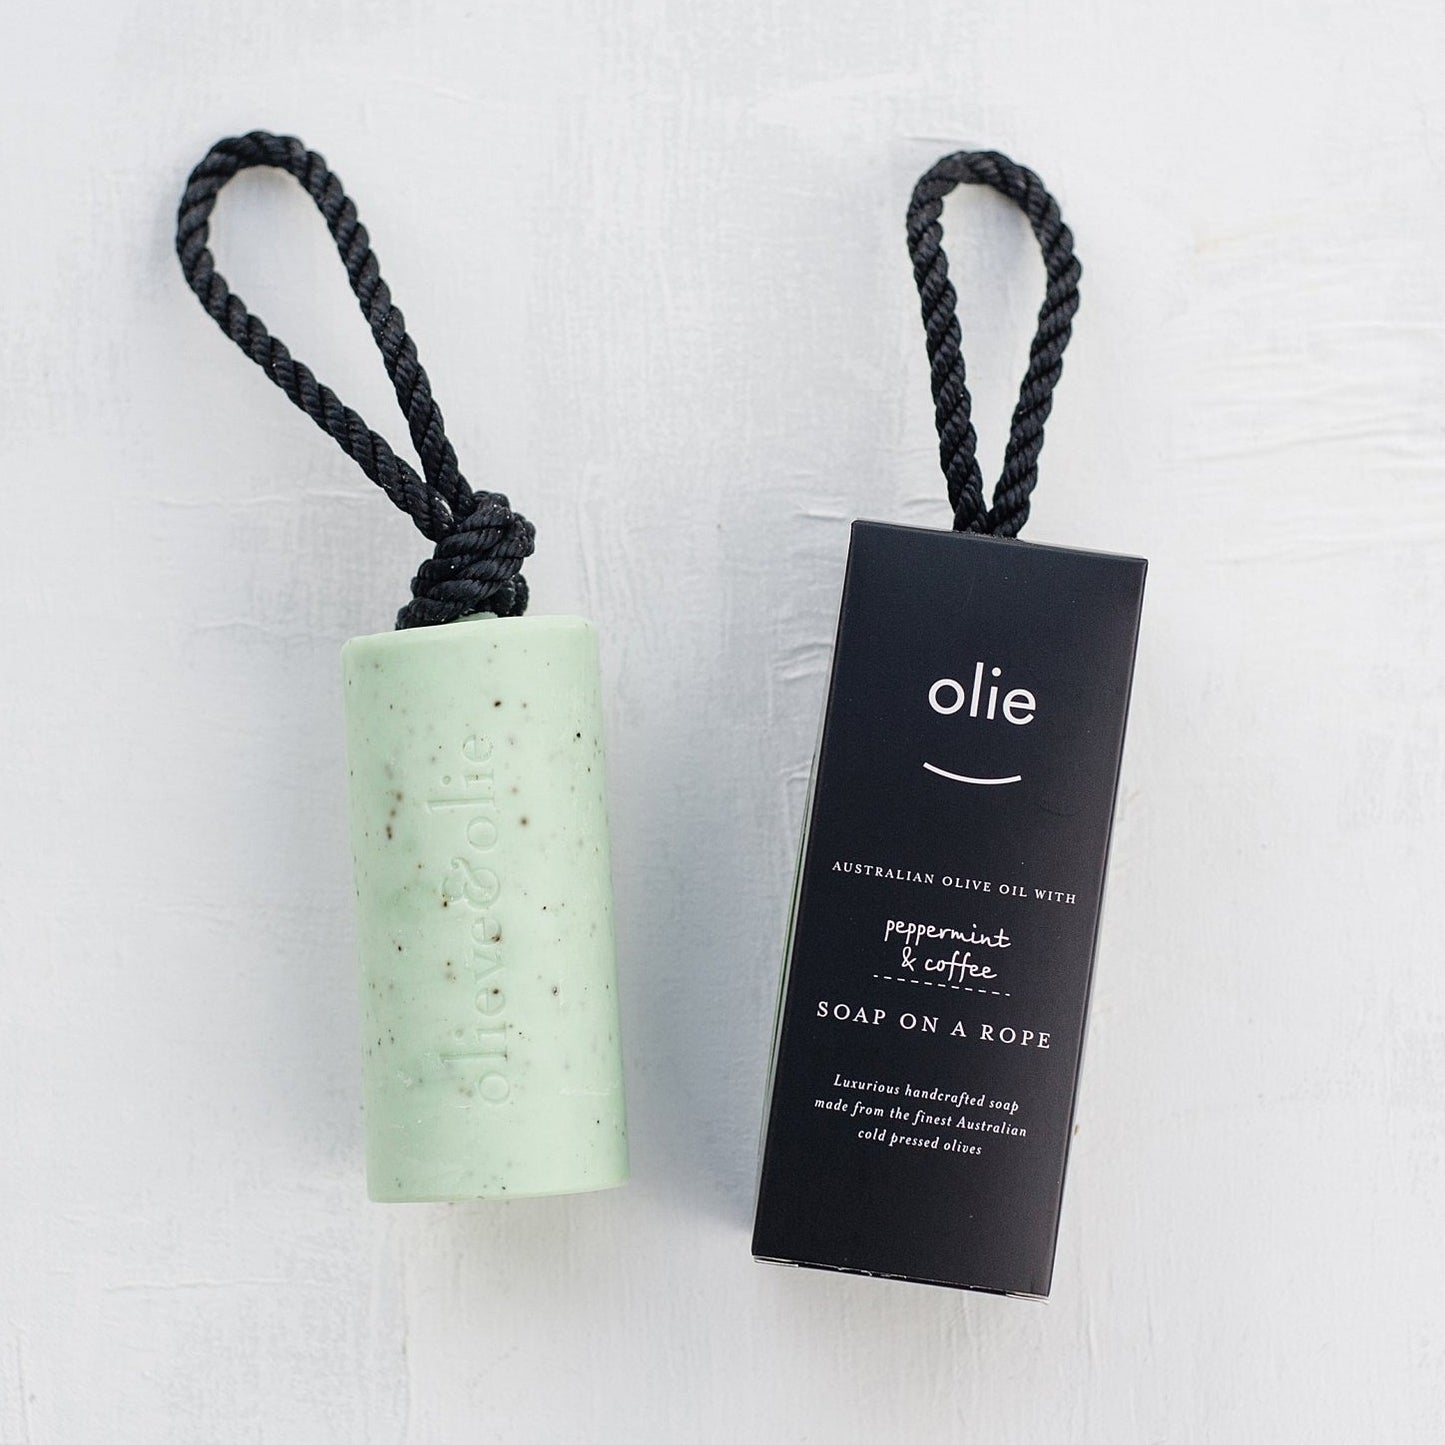 Olieve & Olie: Soap on a rope